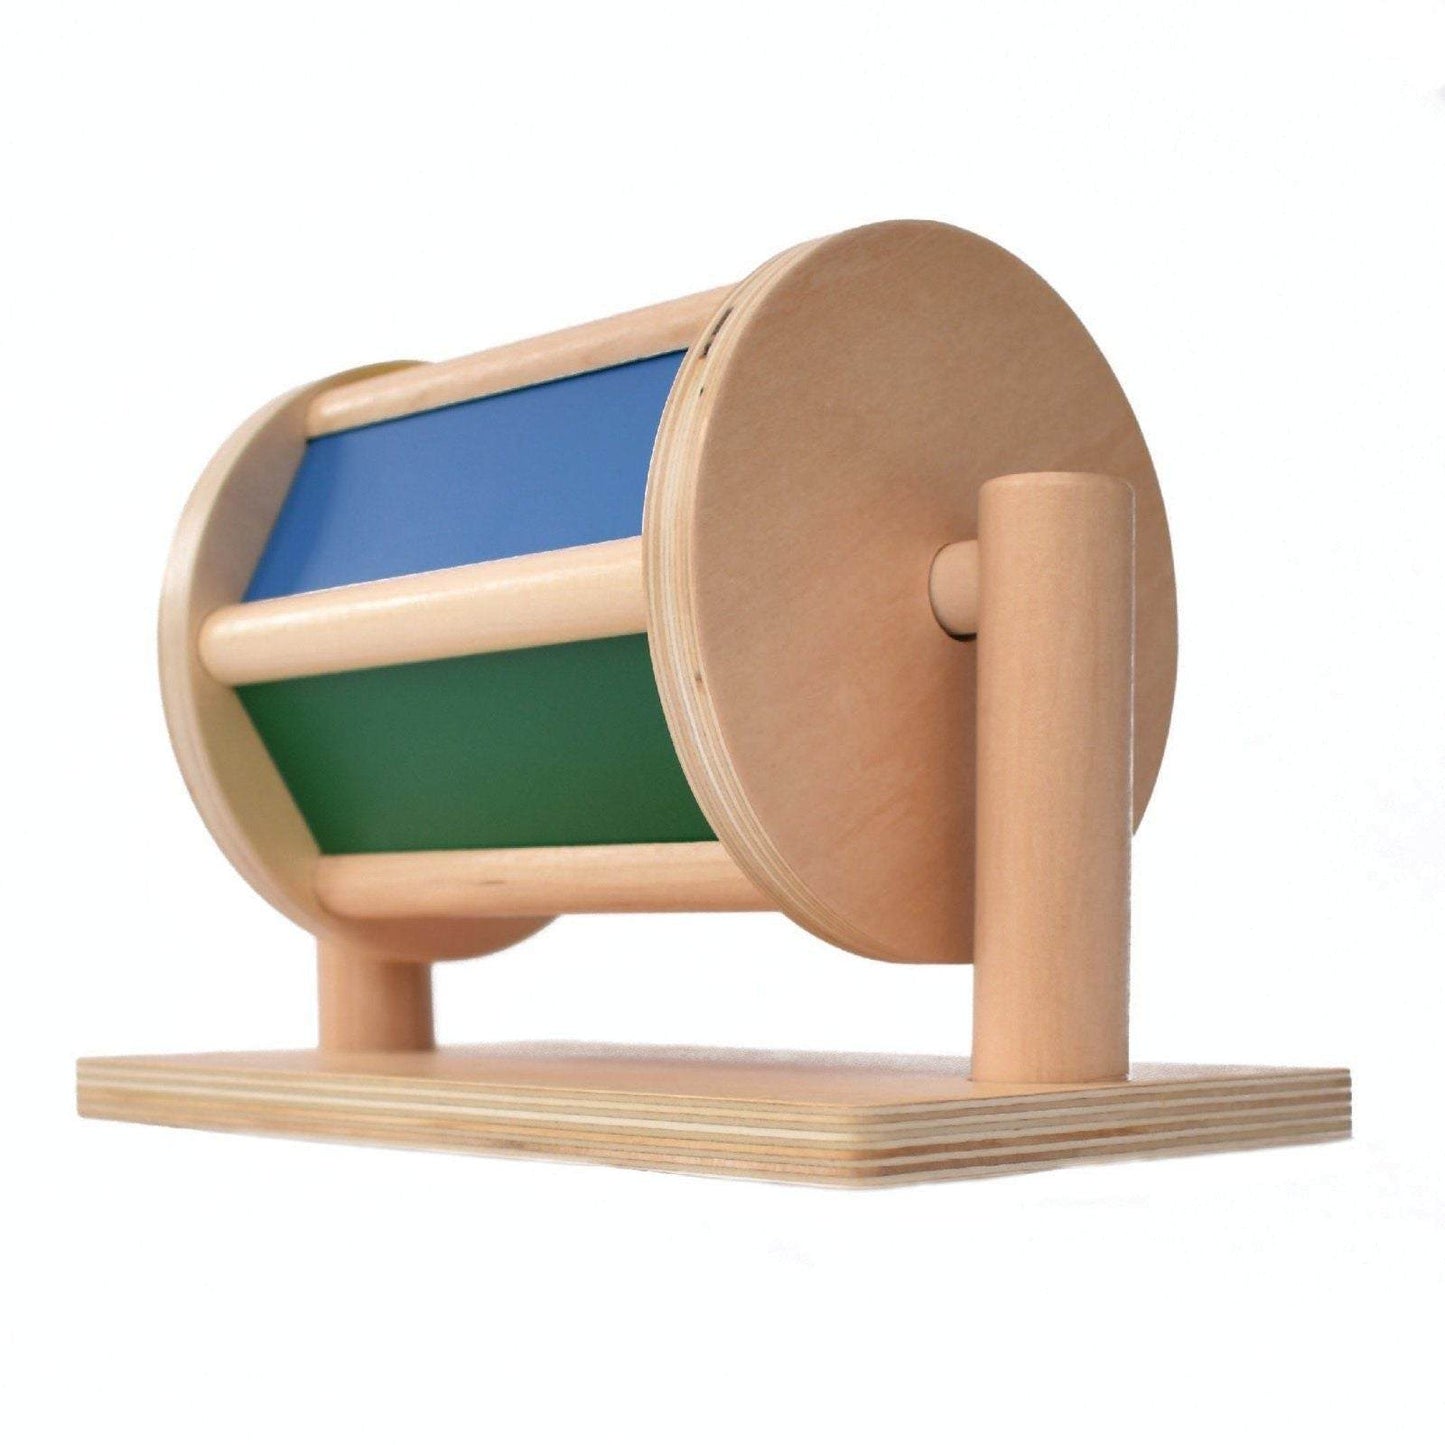 Montessori Spinning Drum showing the colours blue and green